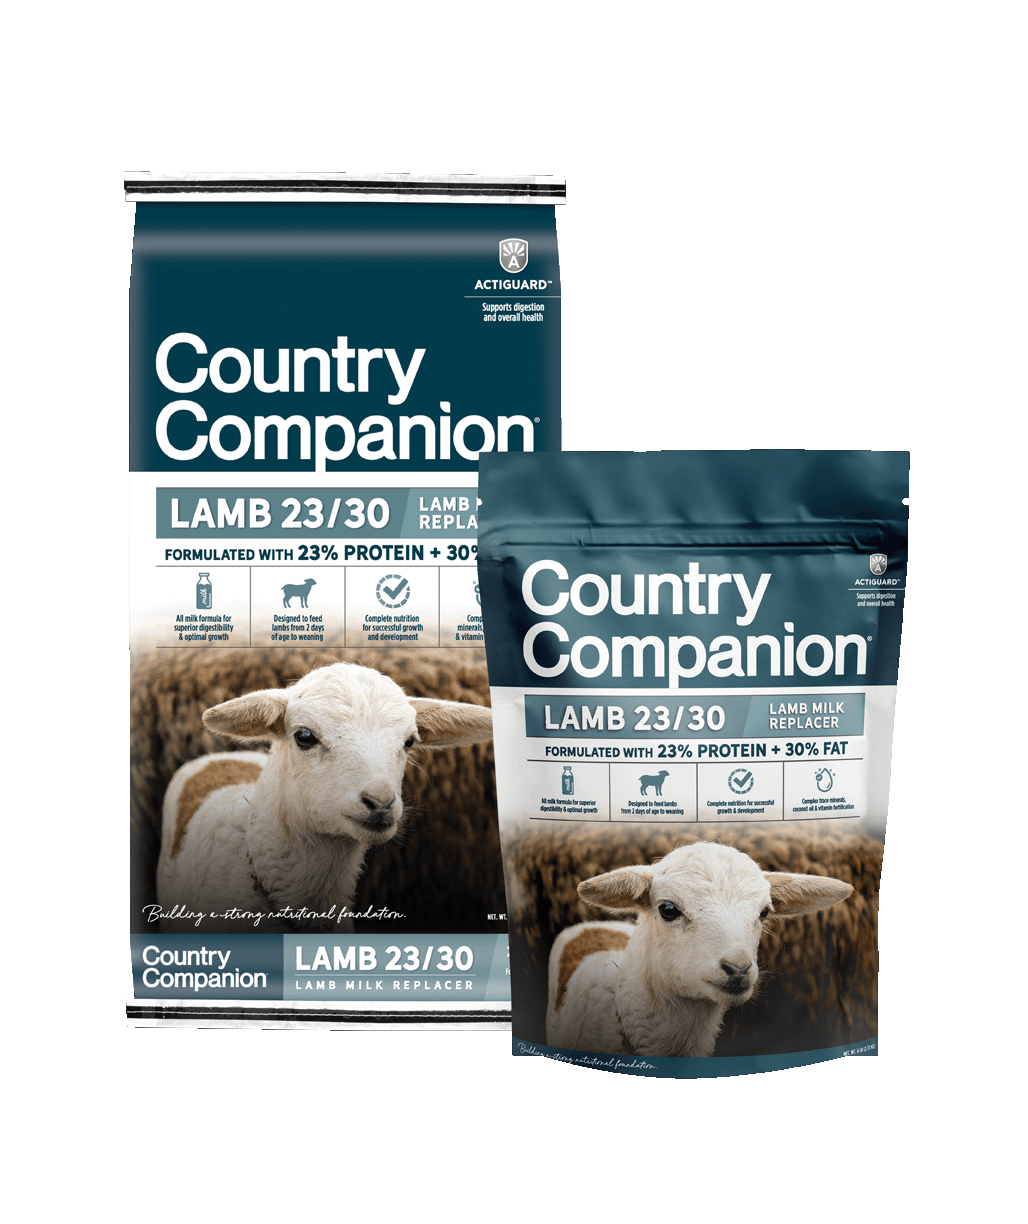 Milk Replacers – Country Companion